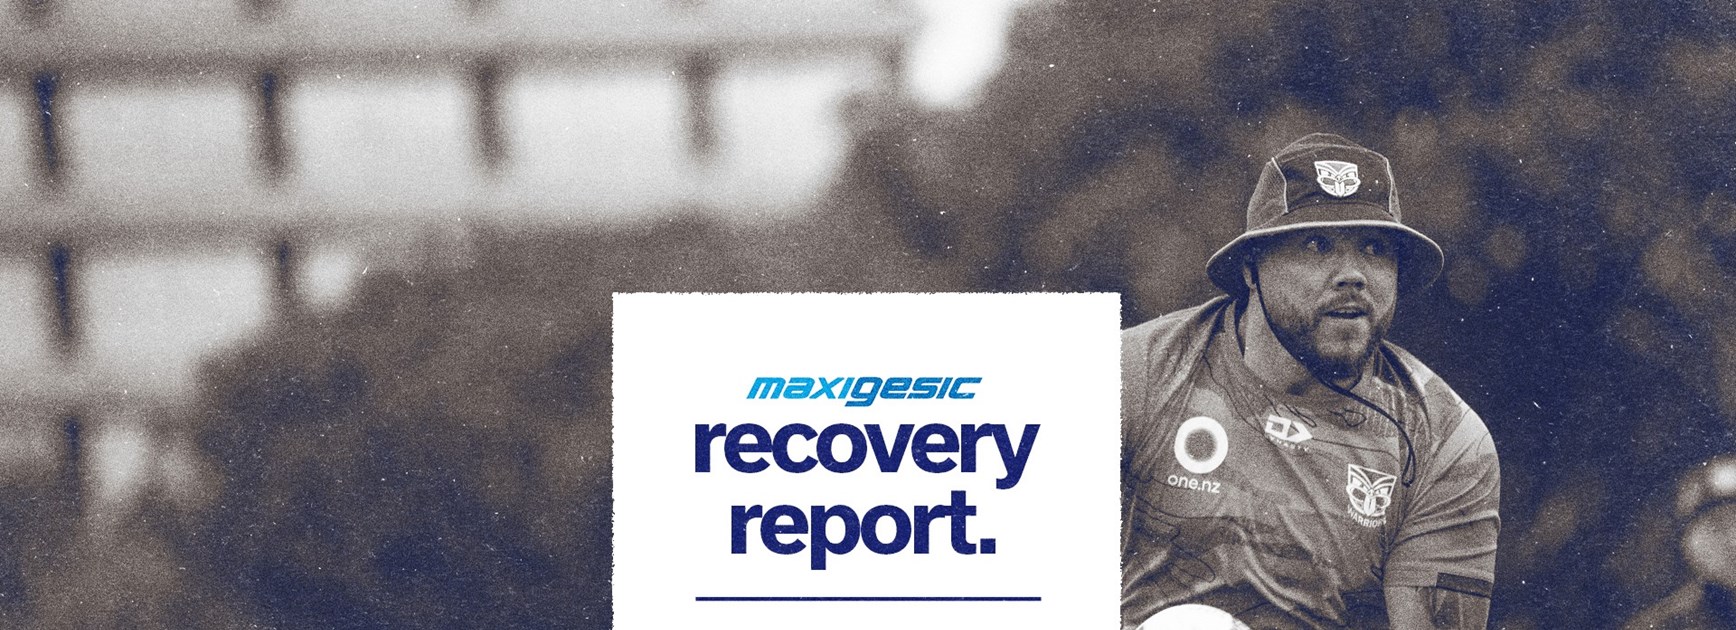 Maxigesic Recovery Report: Four middles out